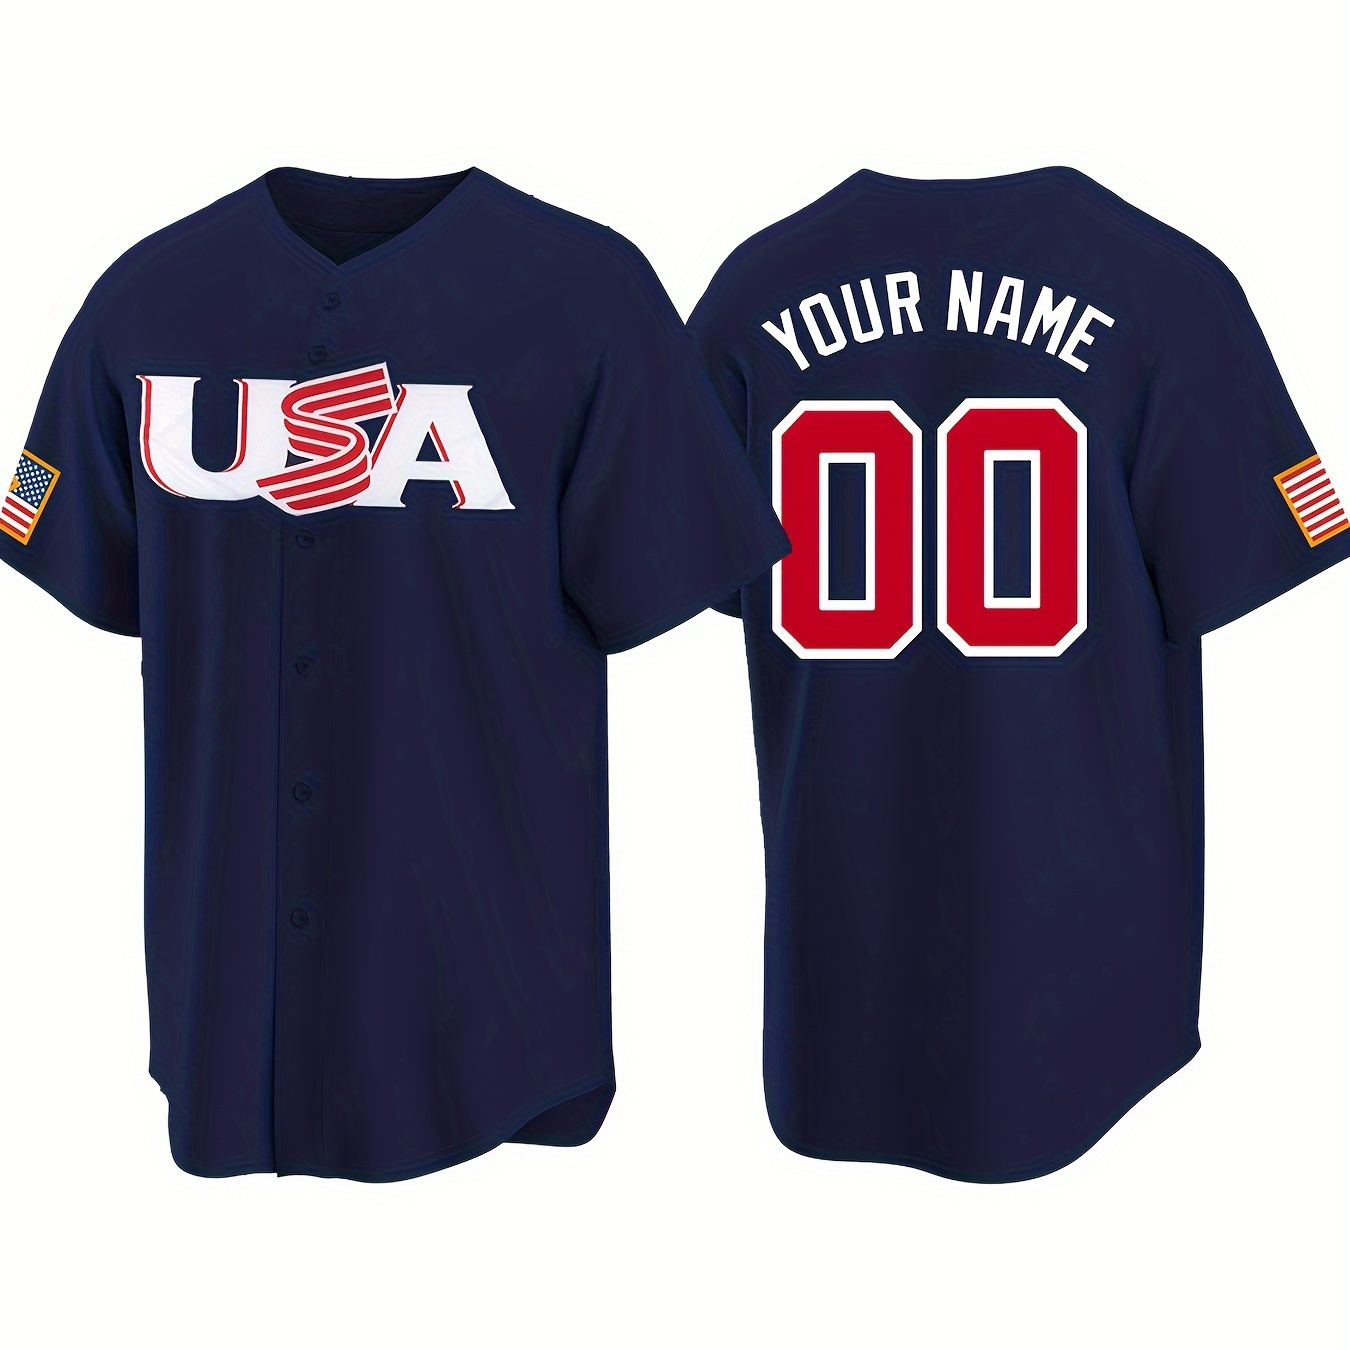 

Customized Name And Number Design, Men's Usa Embroidery Design Short Sleeve Loose Breathable V-neck Baseball Jersey, Sports Shirt For Team Training